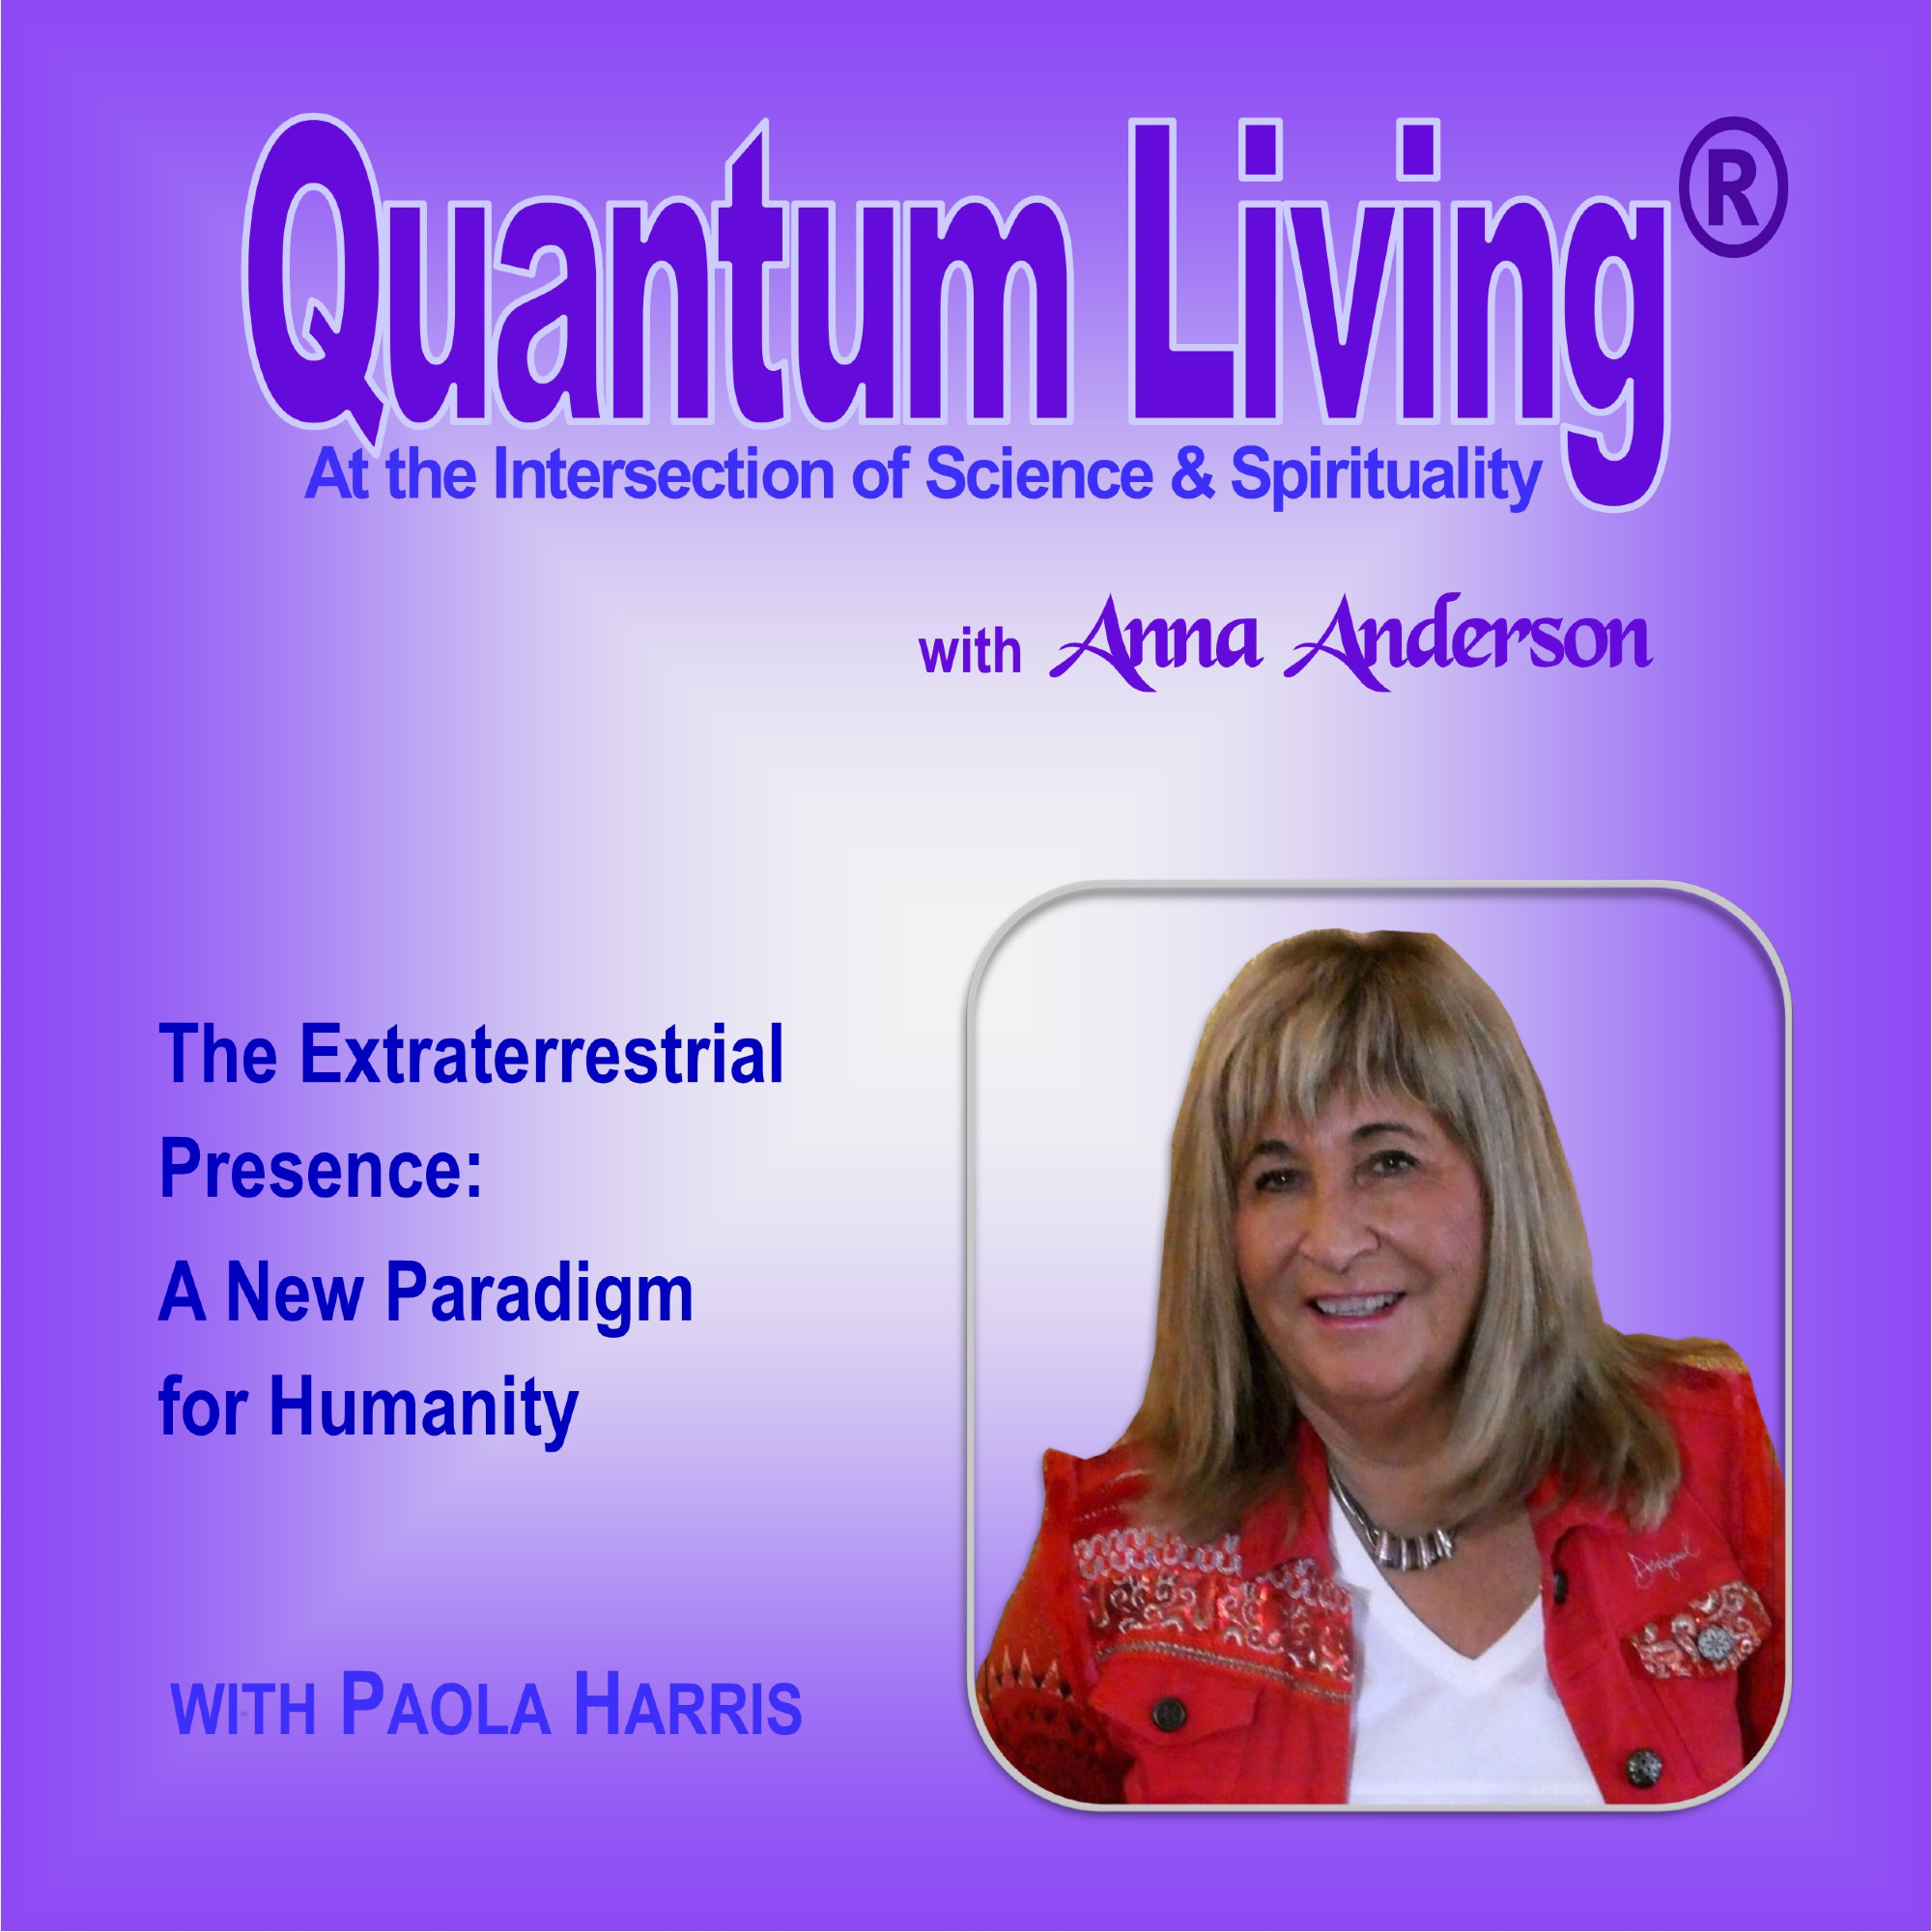 S4 E13: The Extraterrestrial Presence: A New Paradigm for Humanity